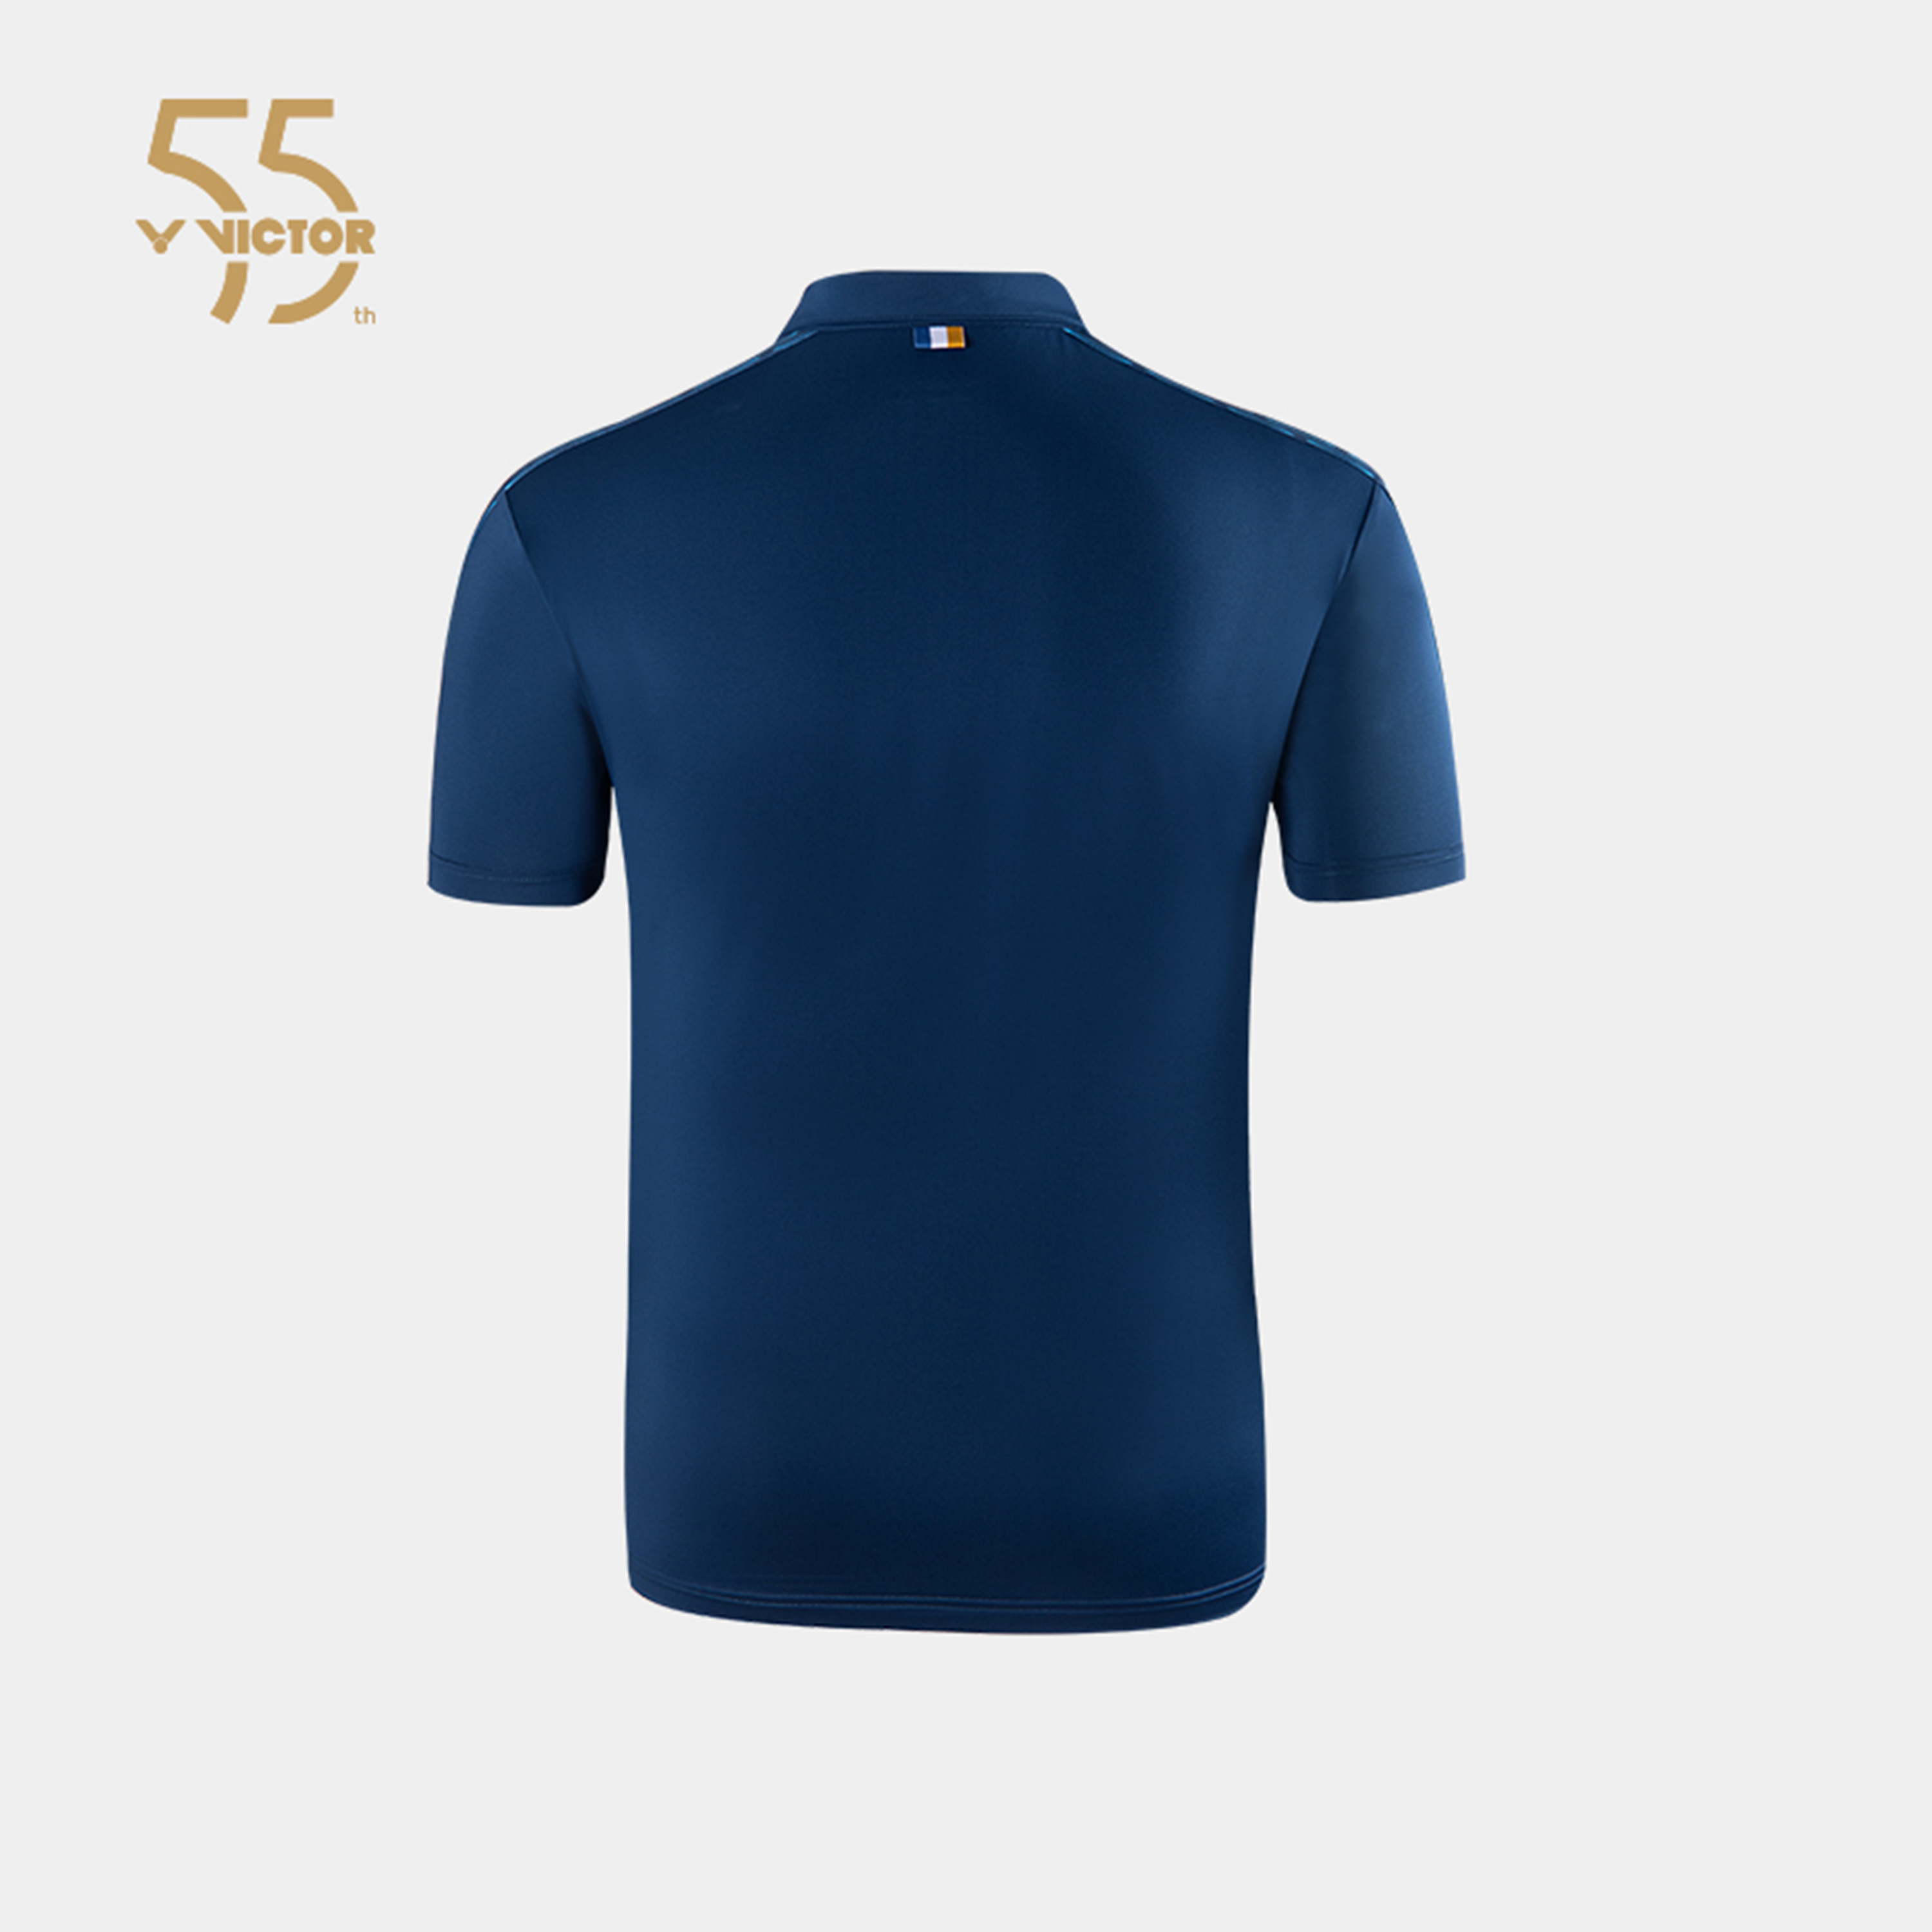 Victor 55th Anniversary Edition S-5502B Premium Sports Polo Shirt Navy UNISEX (Clearance)